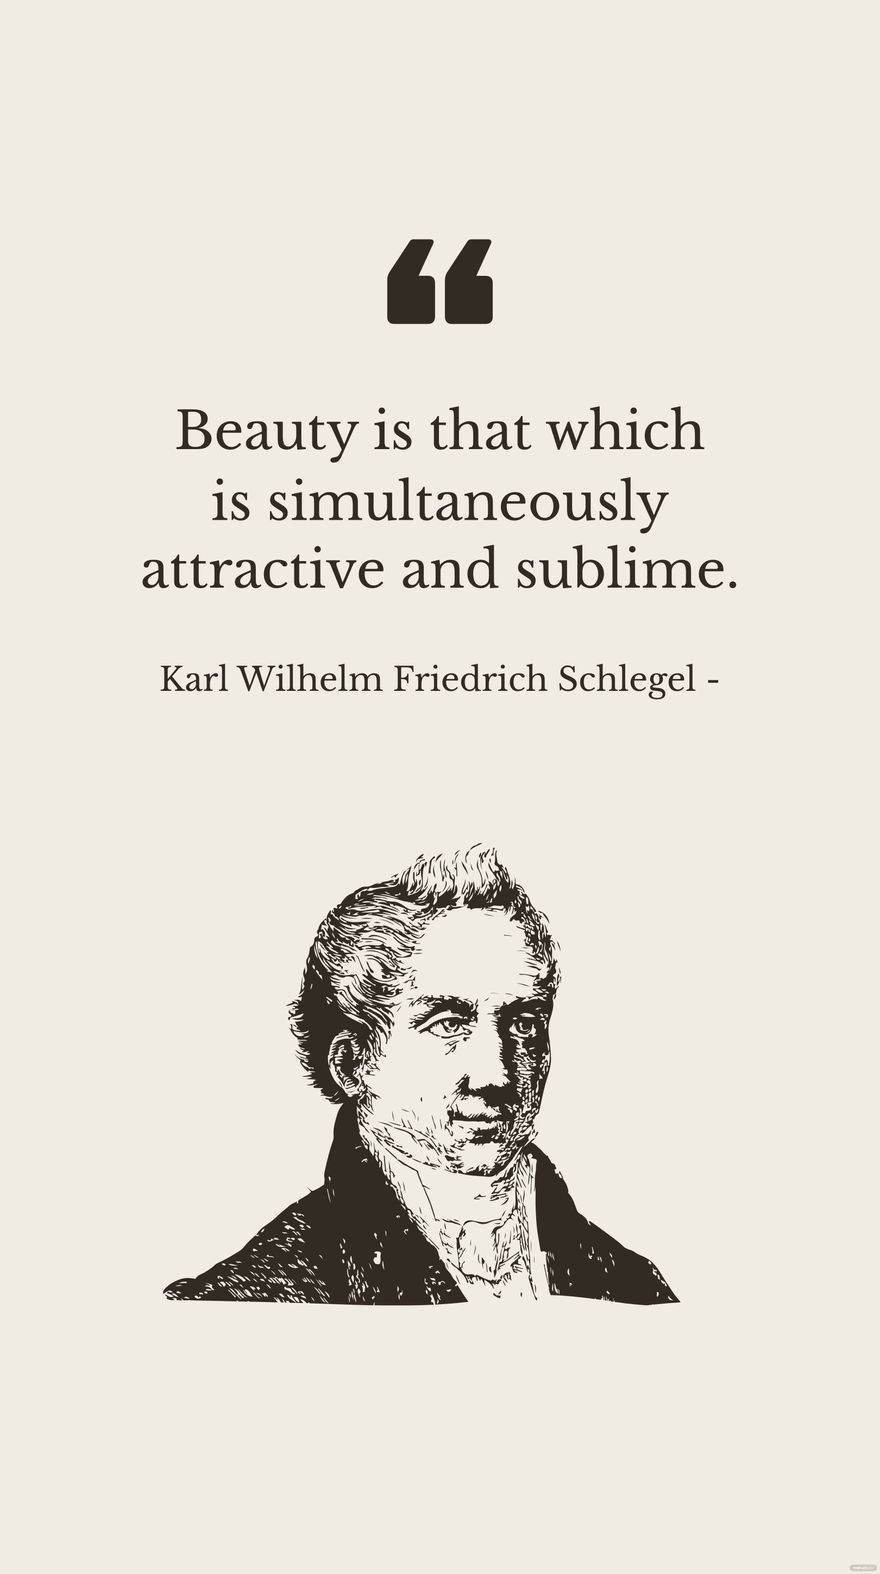 Free Karl Wilhelm Friedrich Schlegel - Beauty is that which is simultaneously attractive and sublime. in JPG